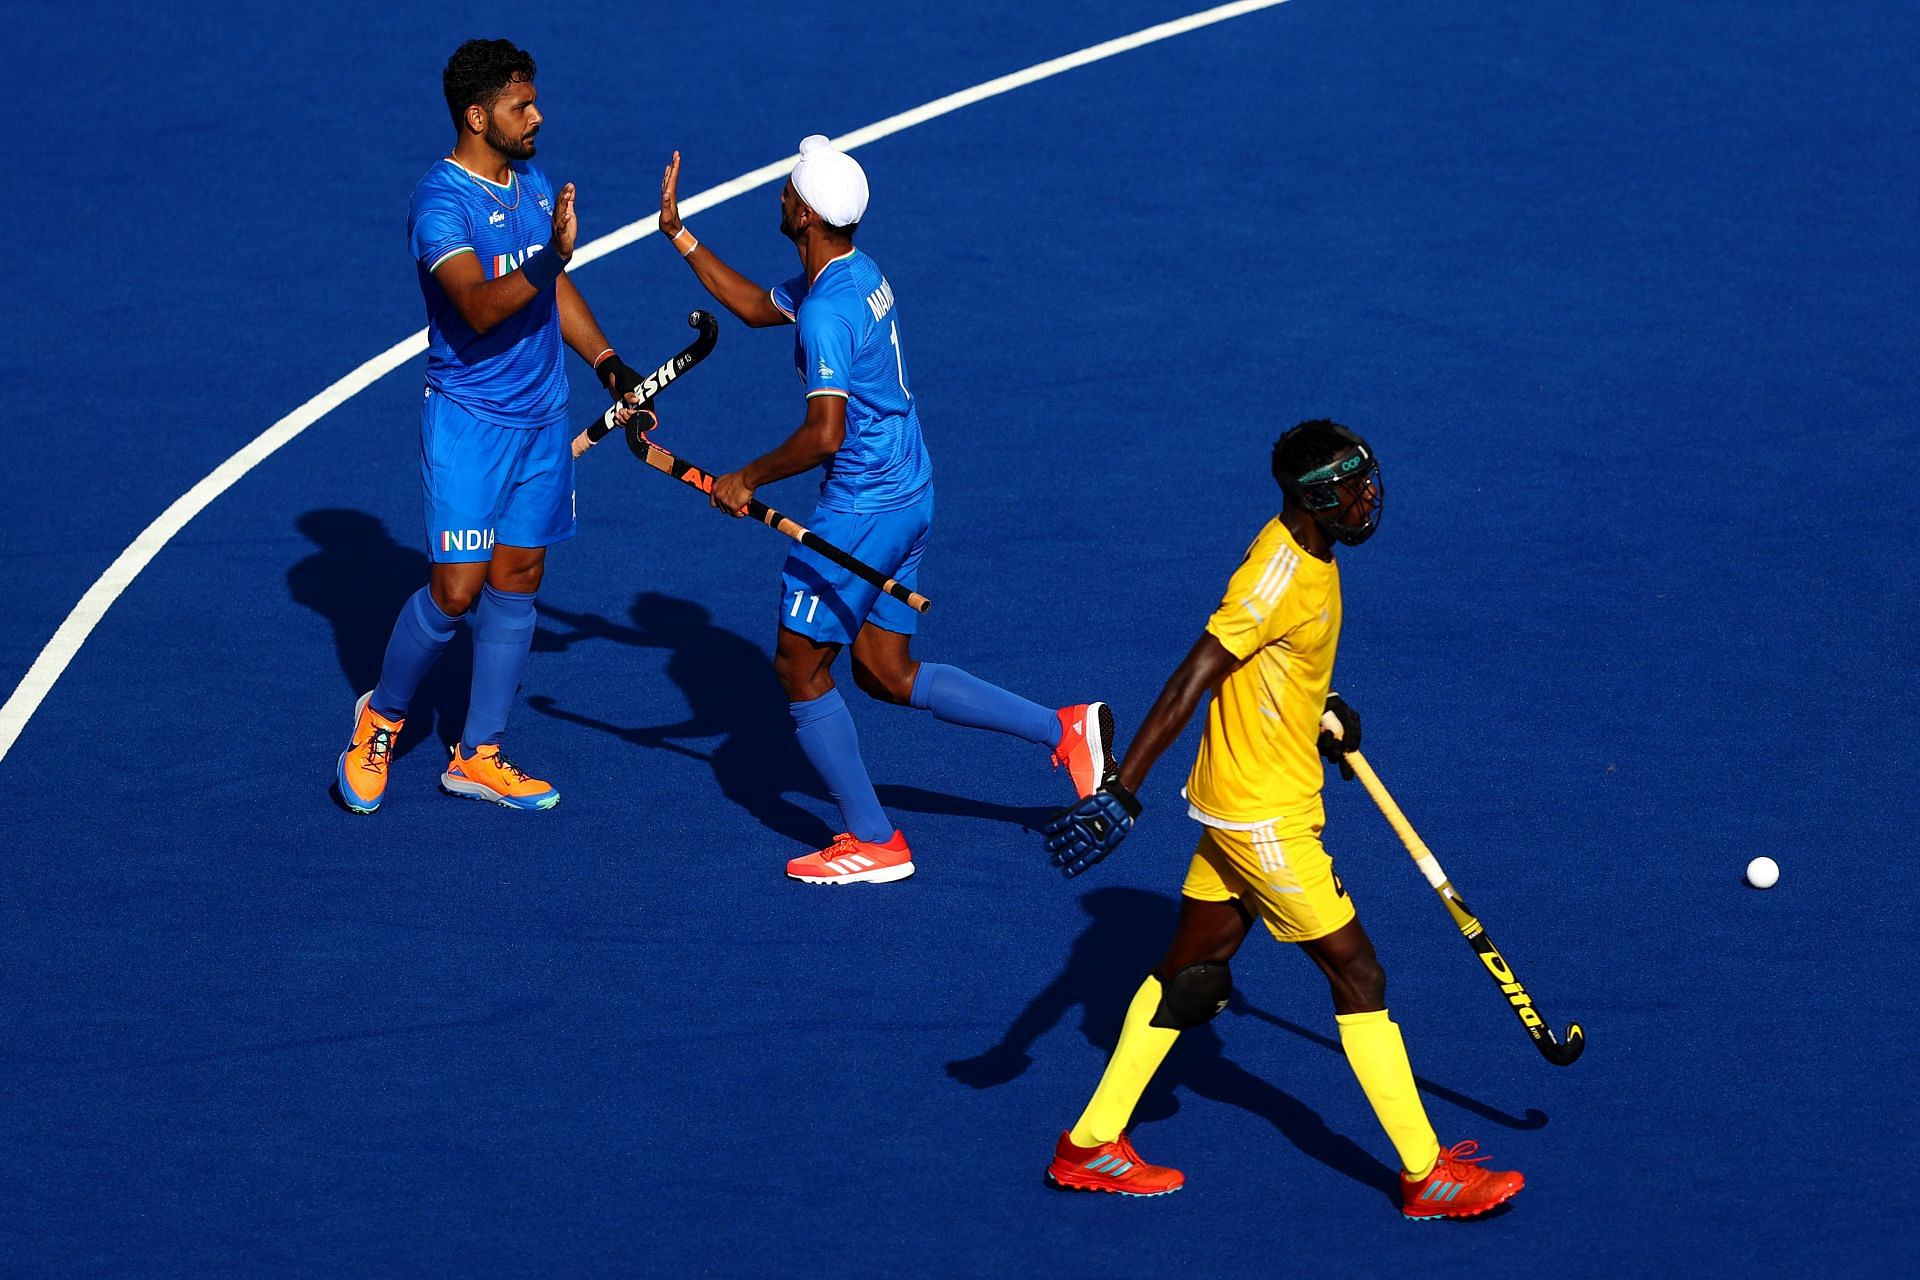 Hockey - Commonwealth Games: Day 3 (Image courtesy: Getty)